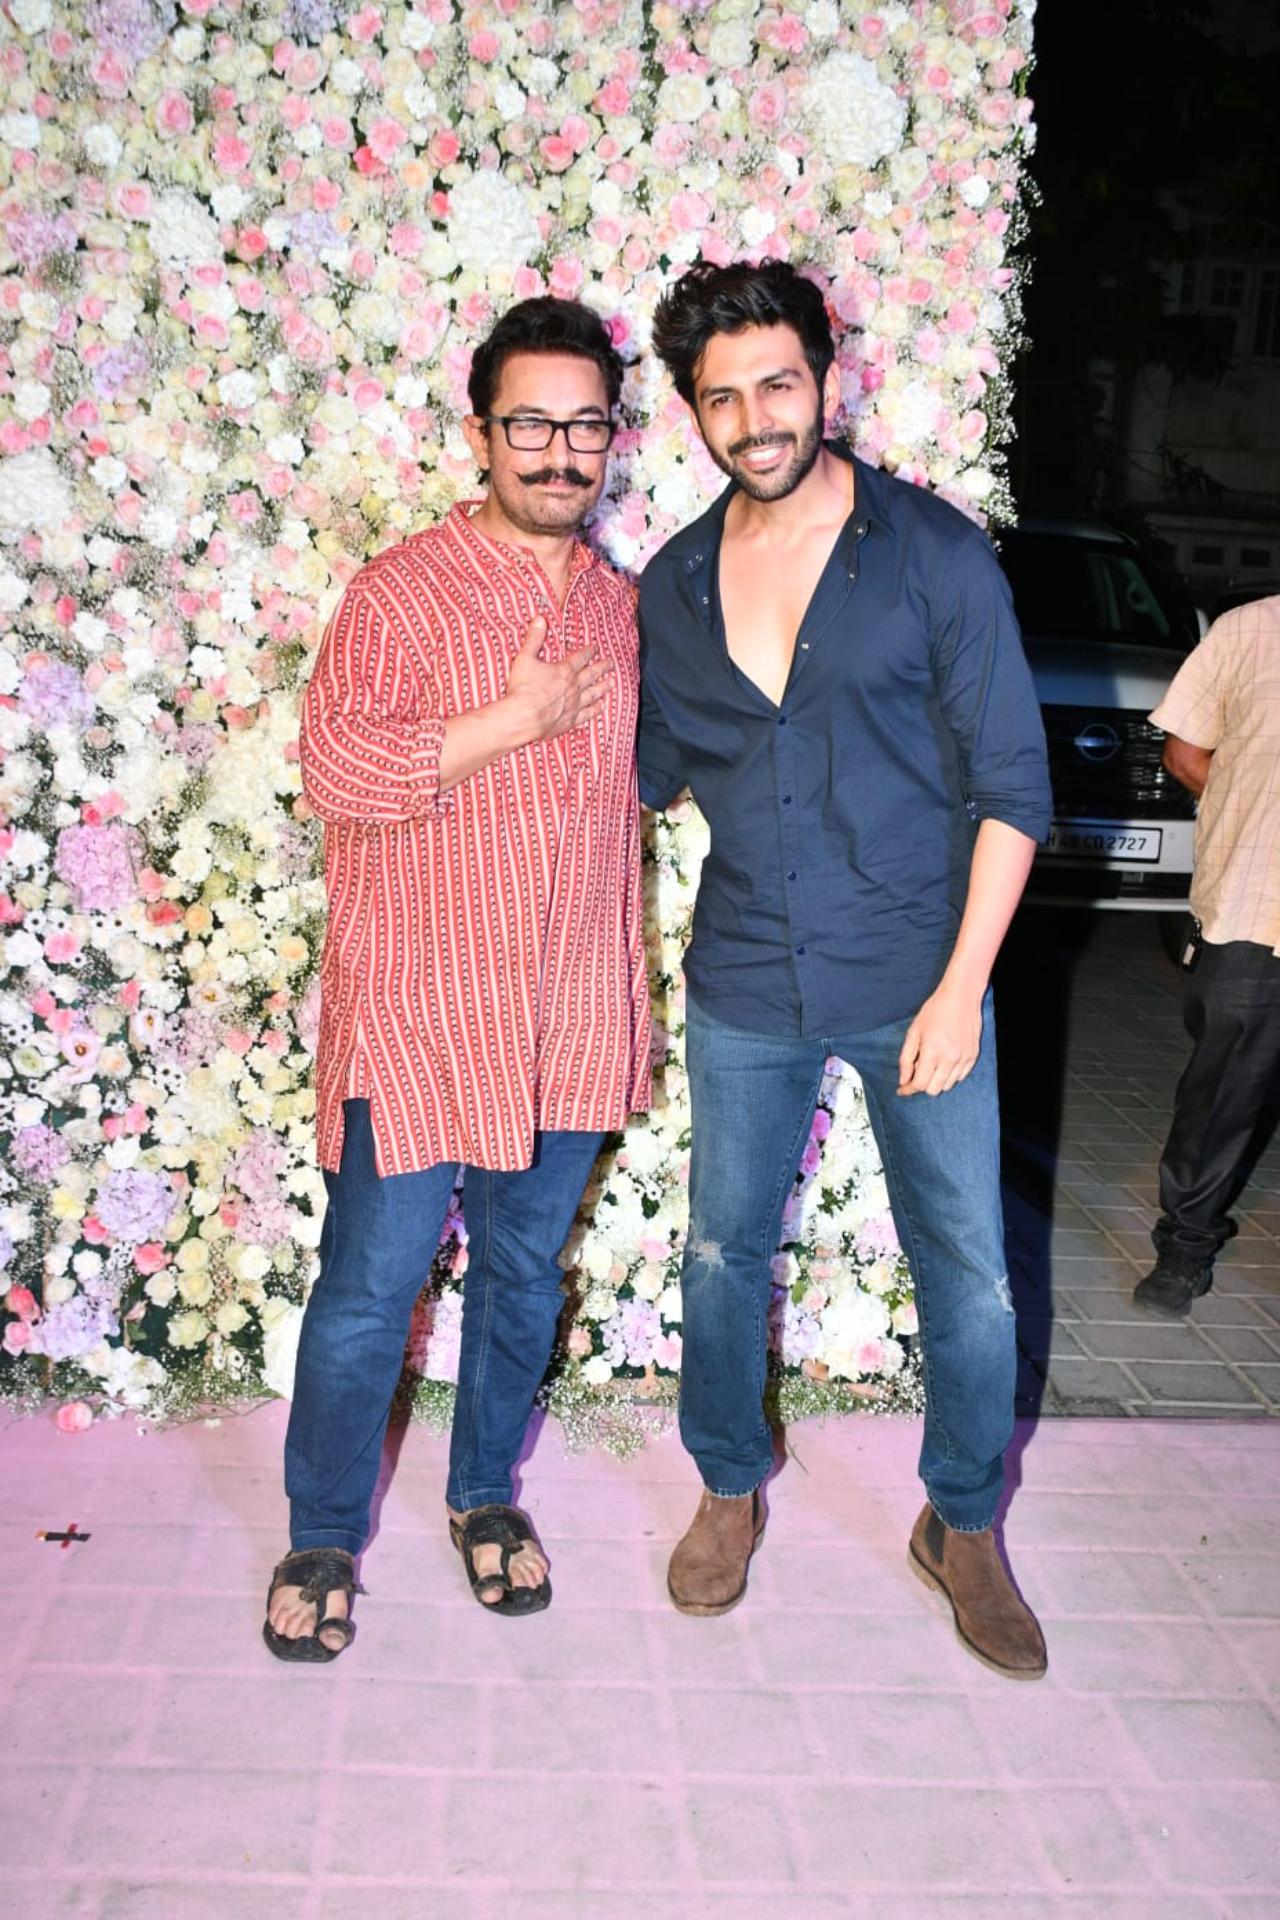 Aamir Khan and Kartik Aaryan were spotted chatting outside the venue and also posed together for the paparazzi